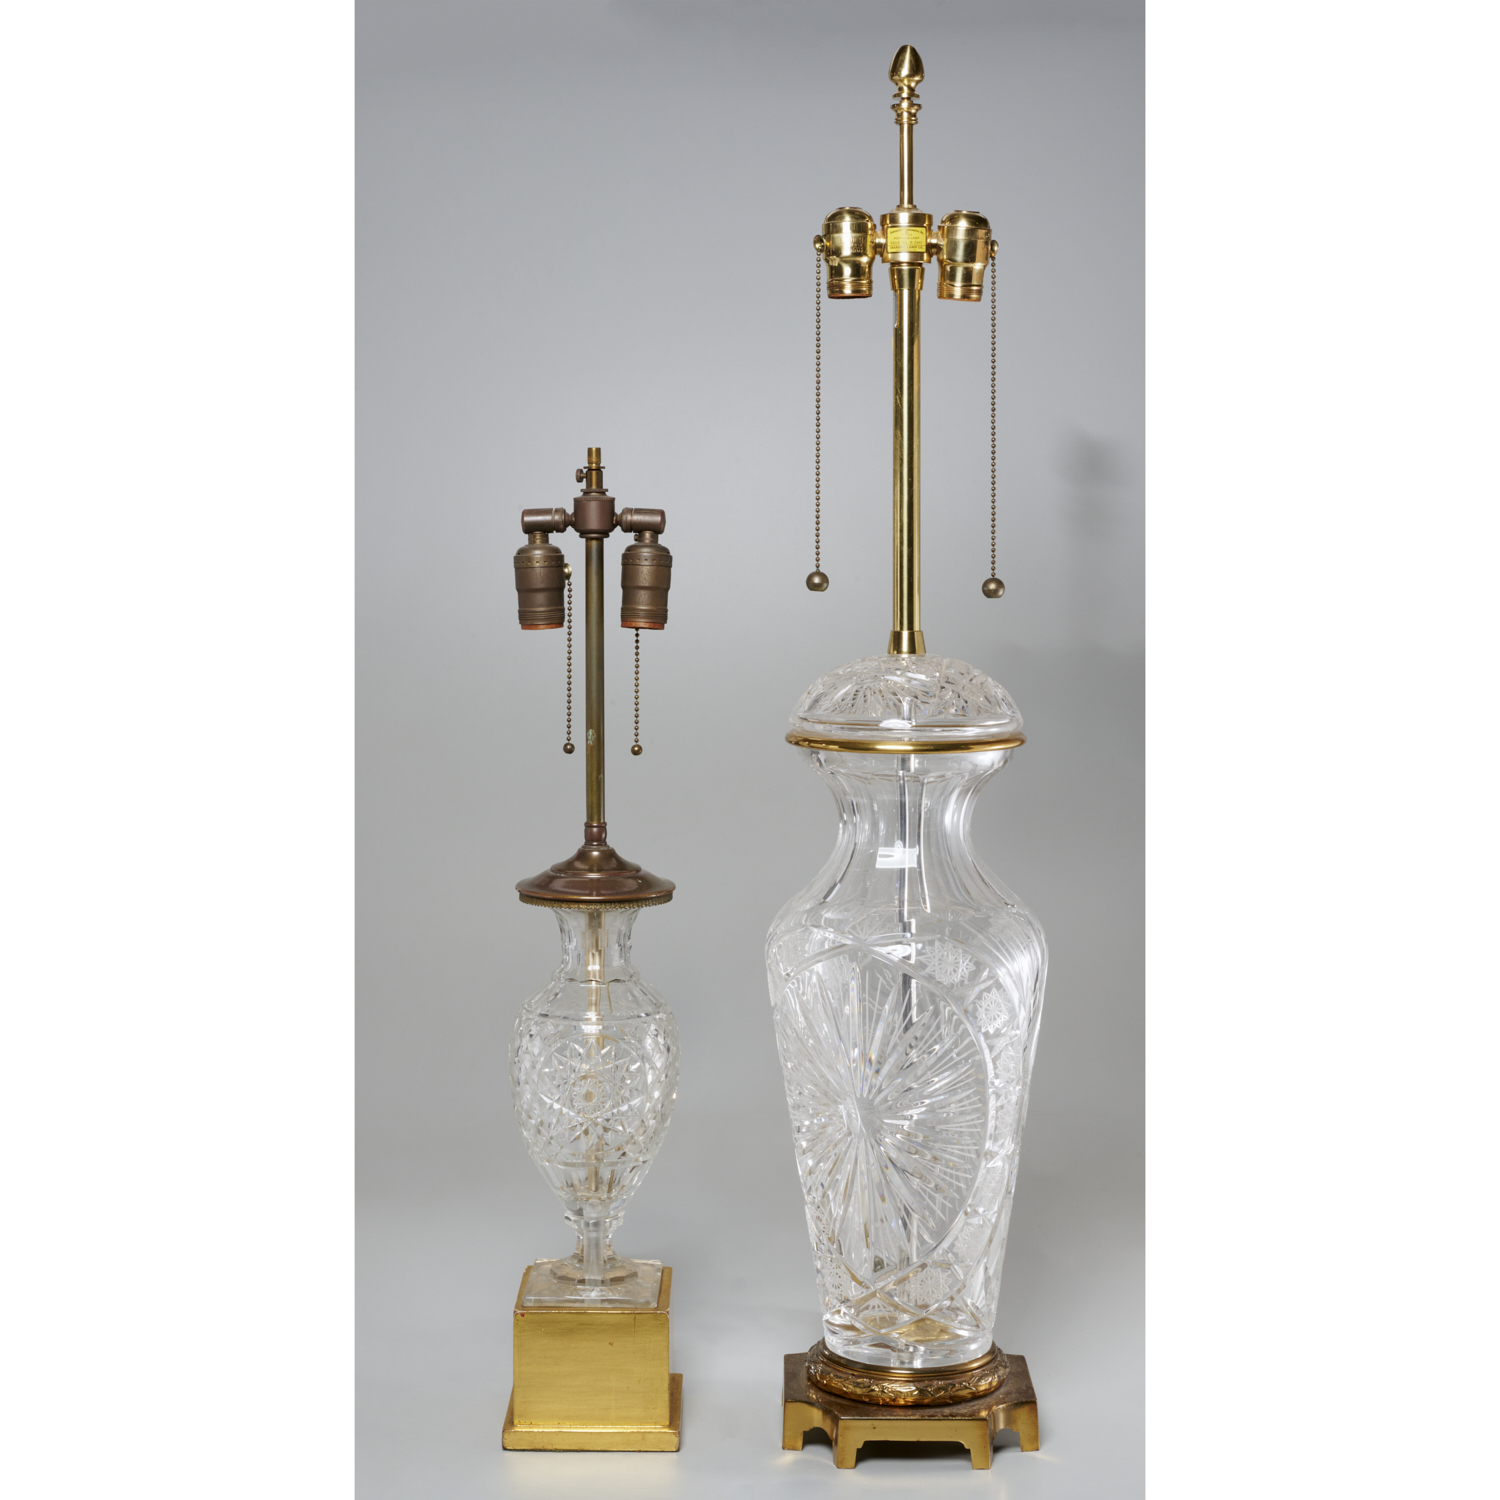  2 EMPIRE STYLE CUT GLASS LAMPS  361073